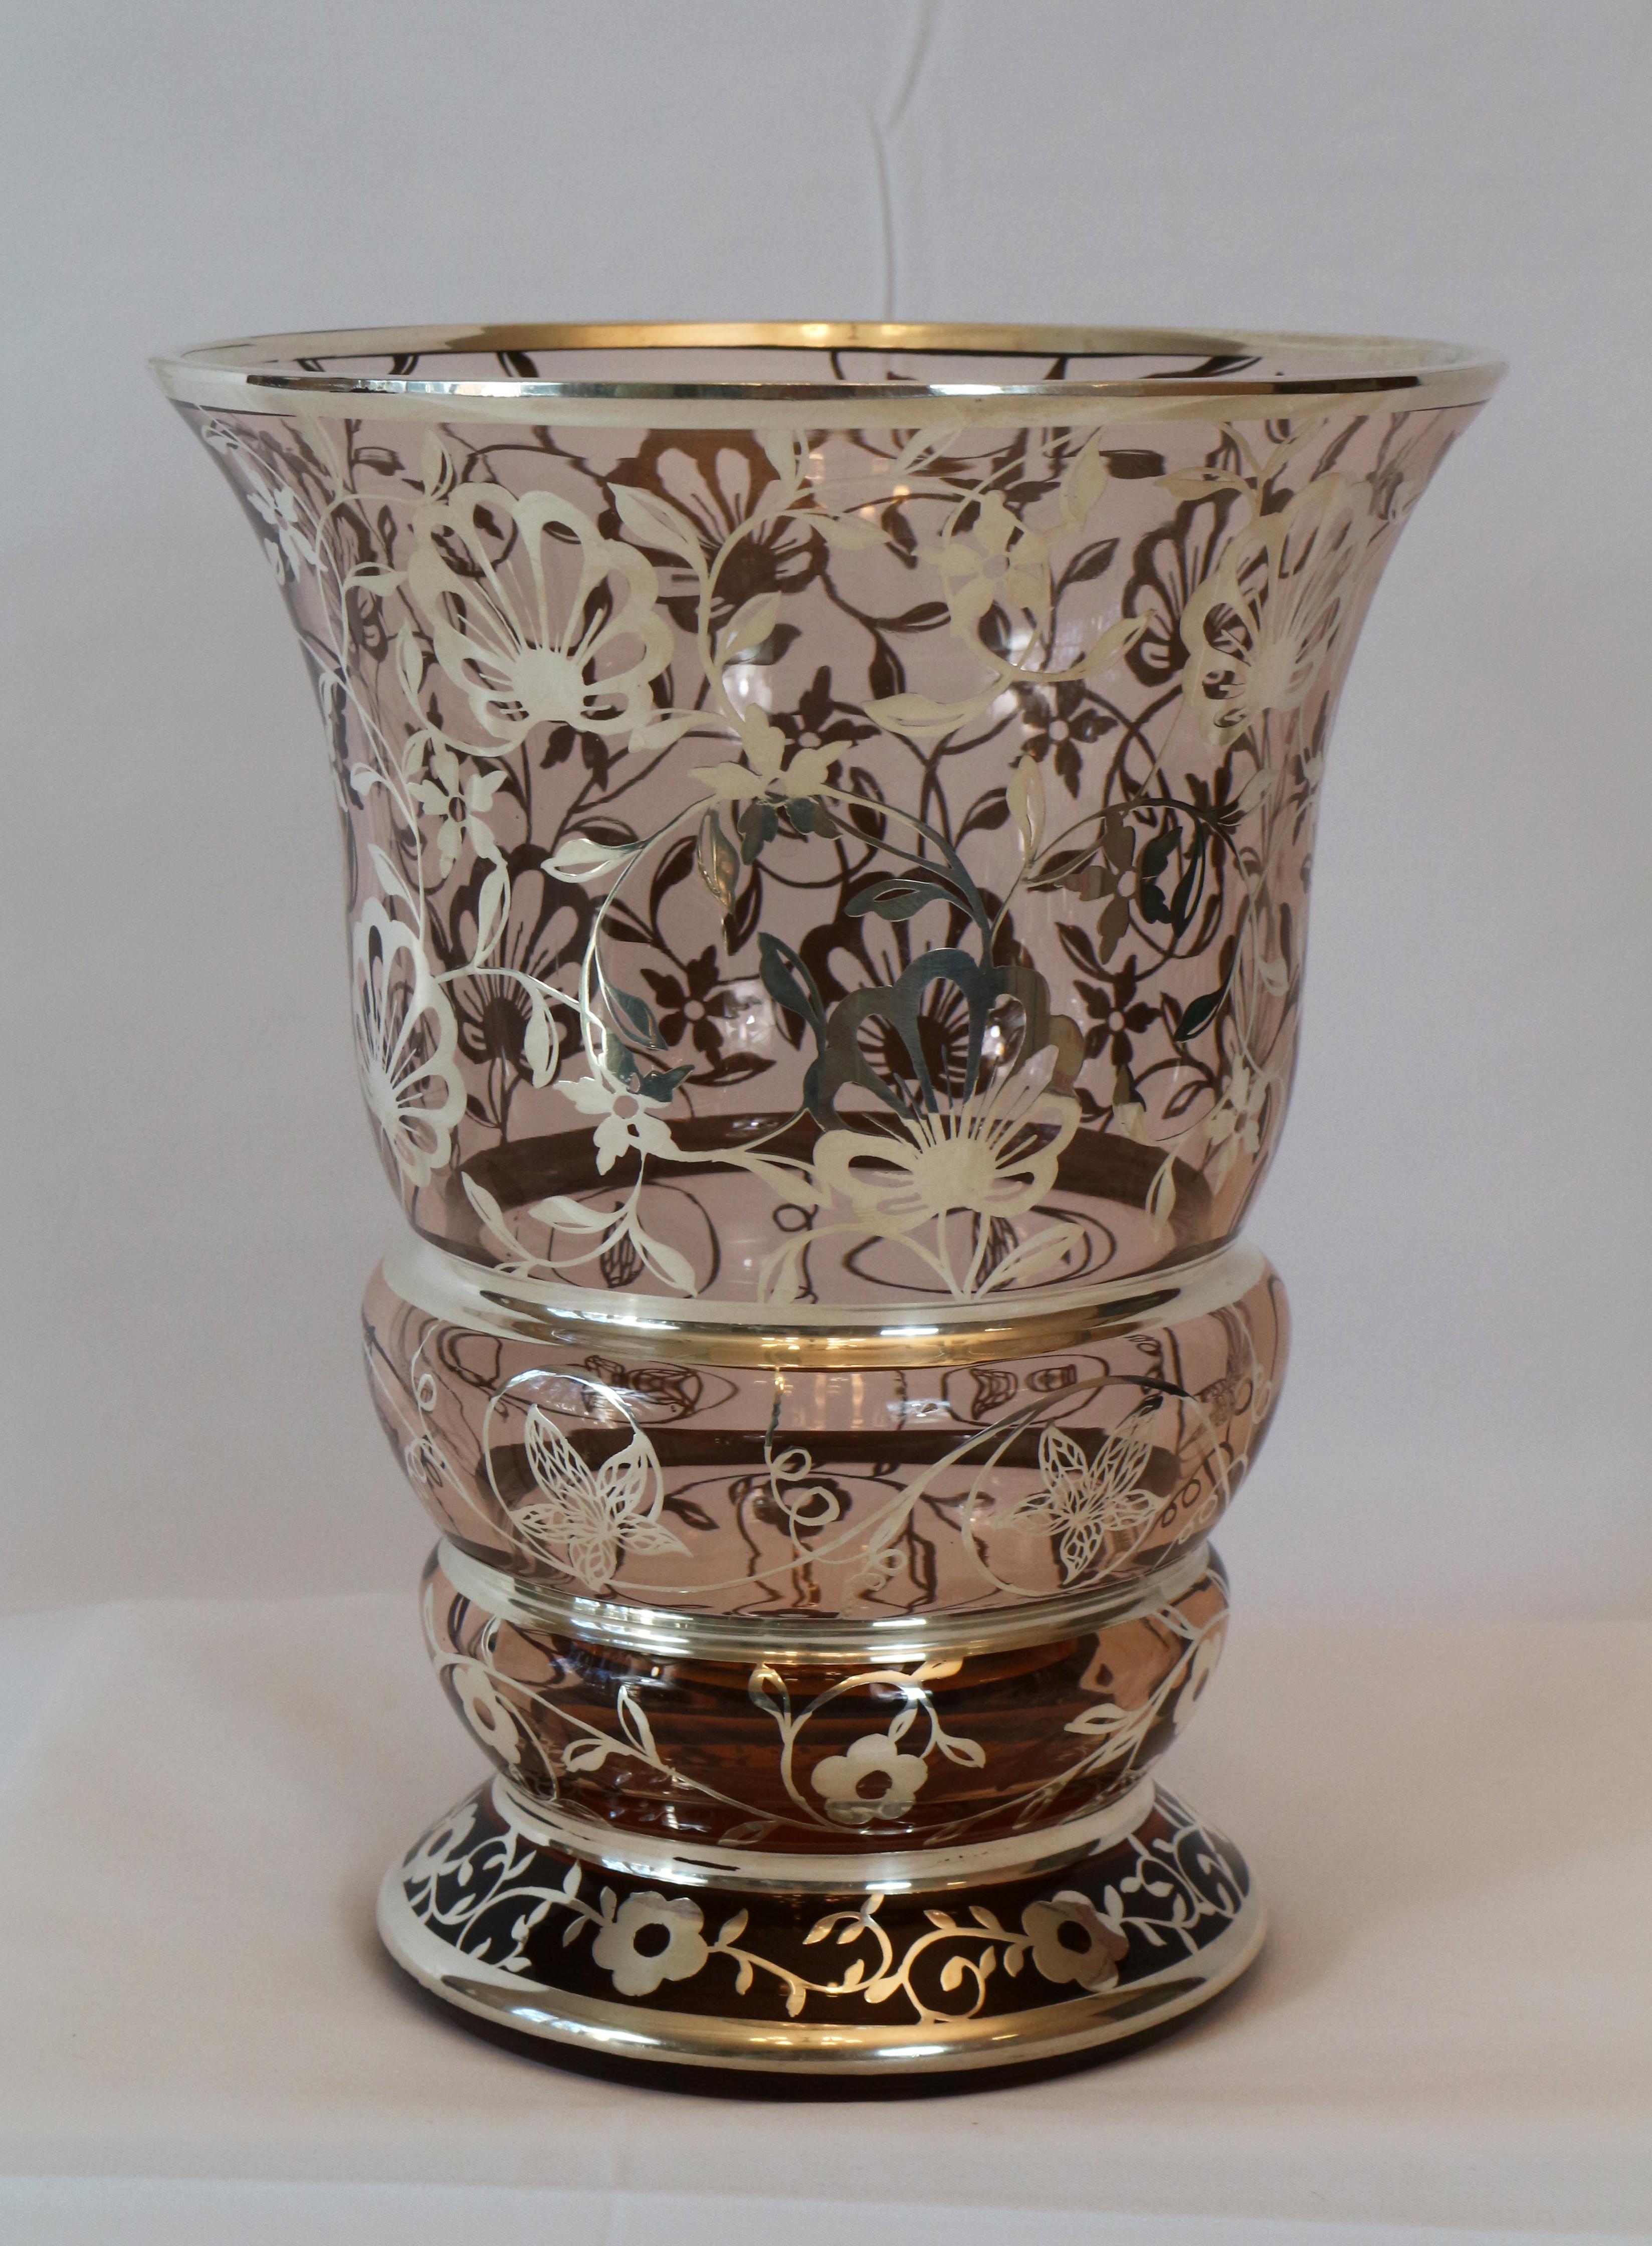  Italian art deco  glass vase covered in silver with floral motifs (Art déco)